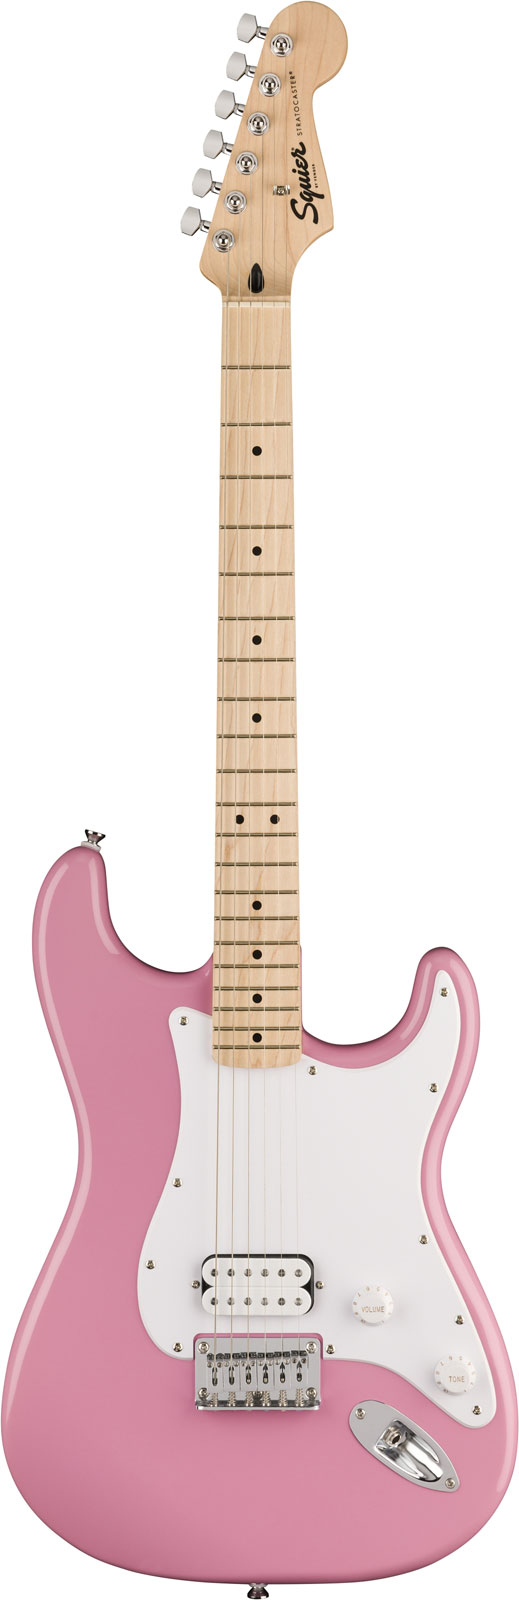 SQUIER STRATOCASTER HT H SONIC MN FLASH PINK